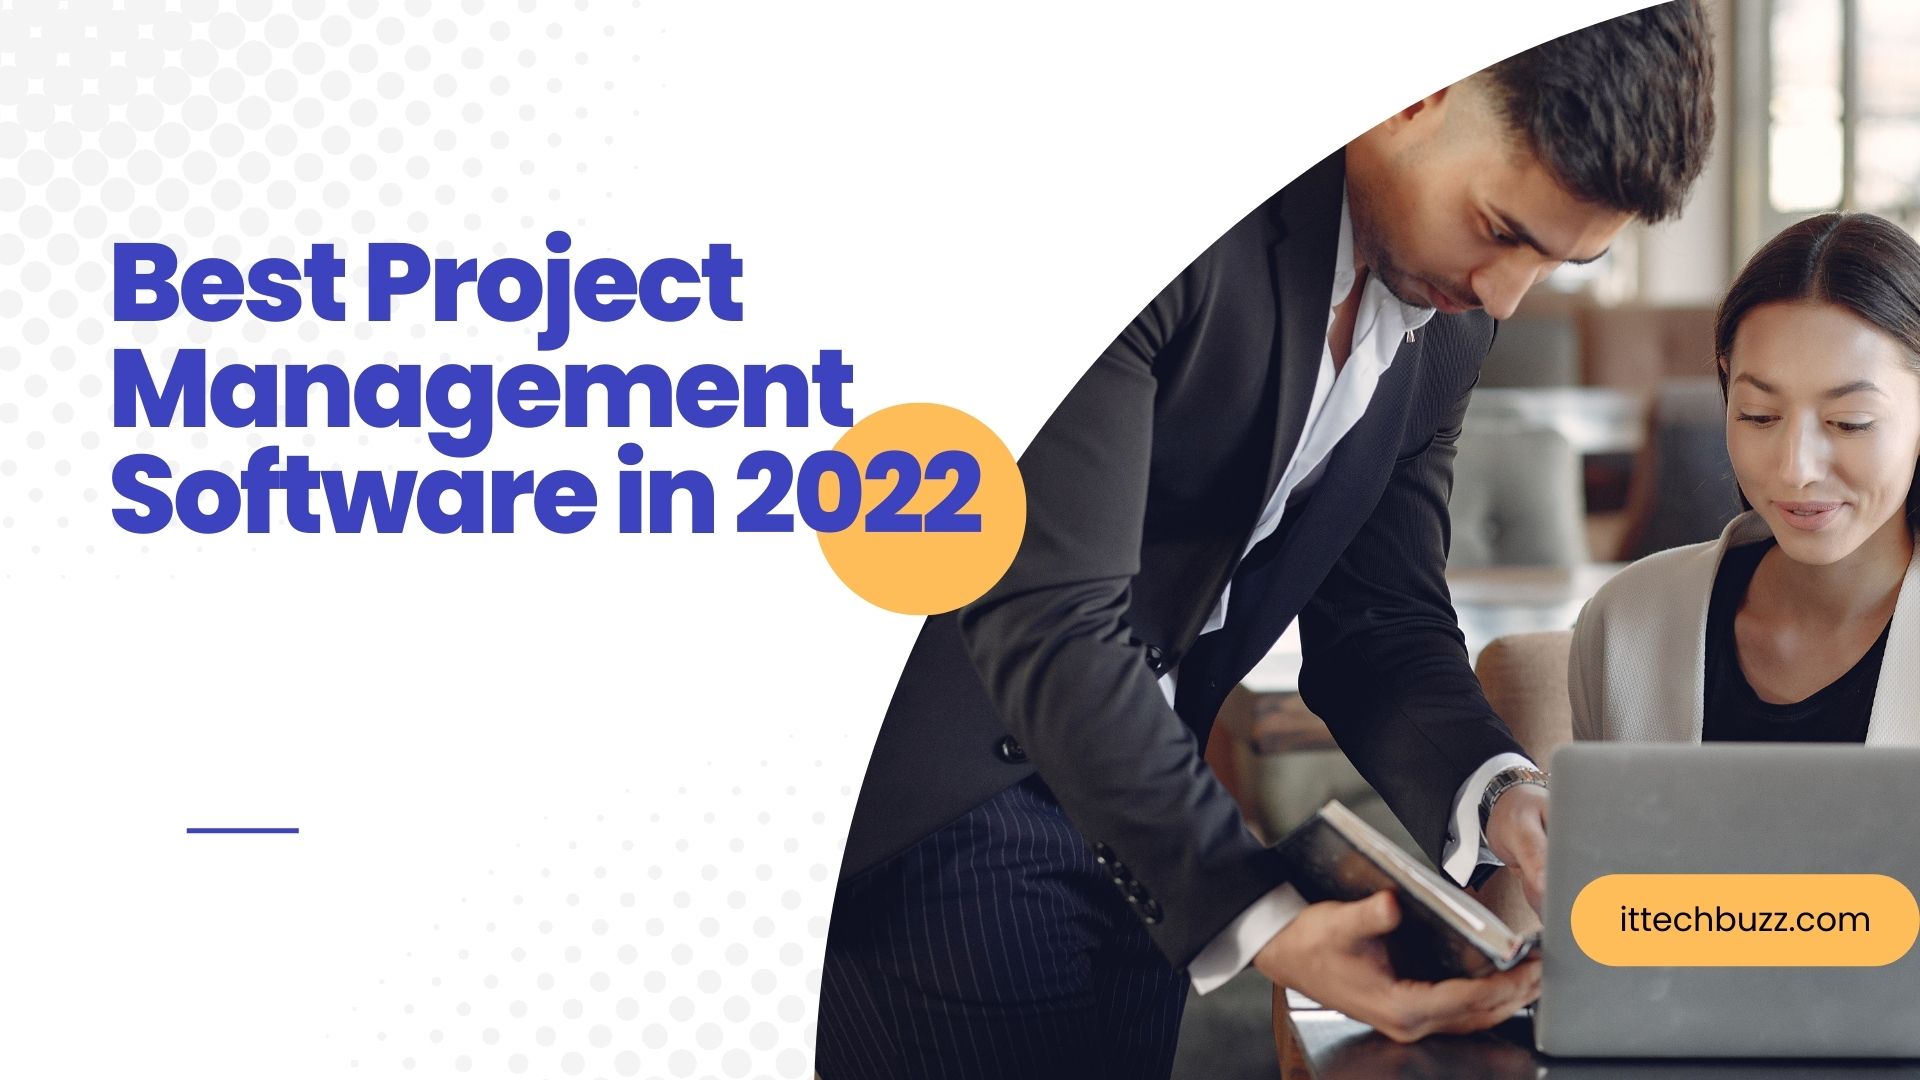 Best Project Management Software in 2022